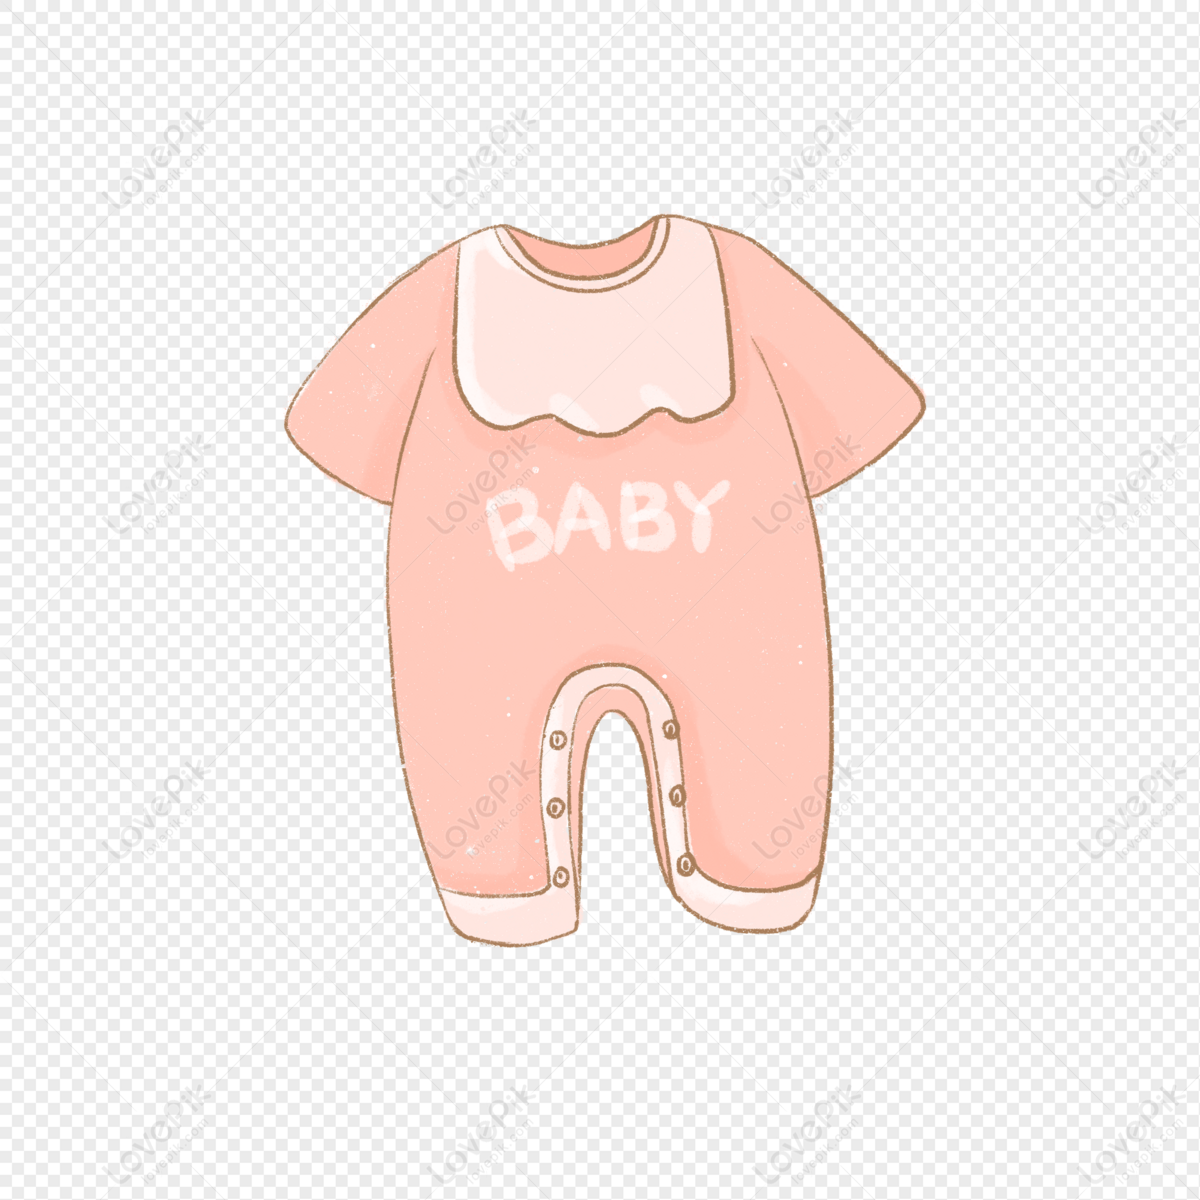 Baby clothes, baby set, baby, baby clothes png transparent image